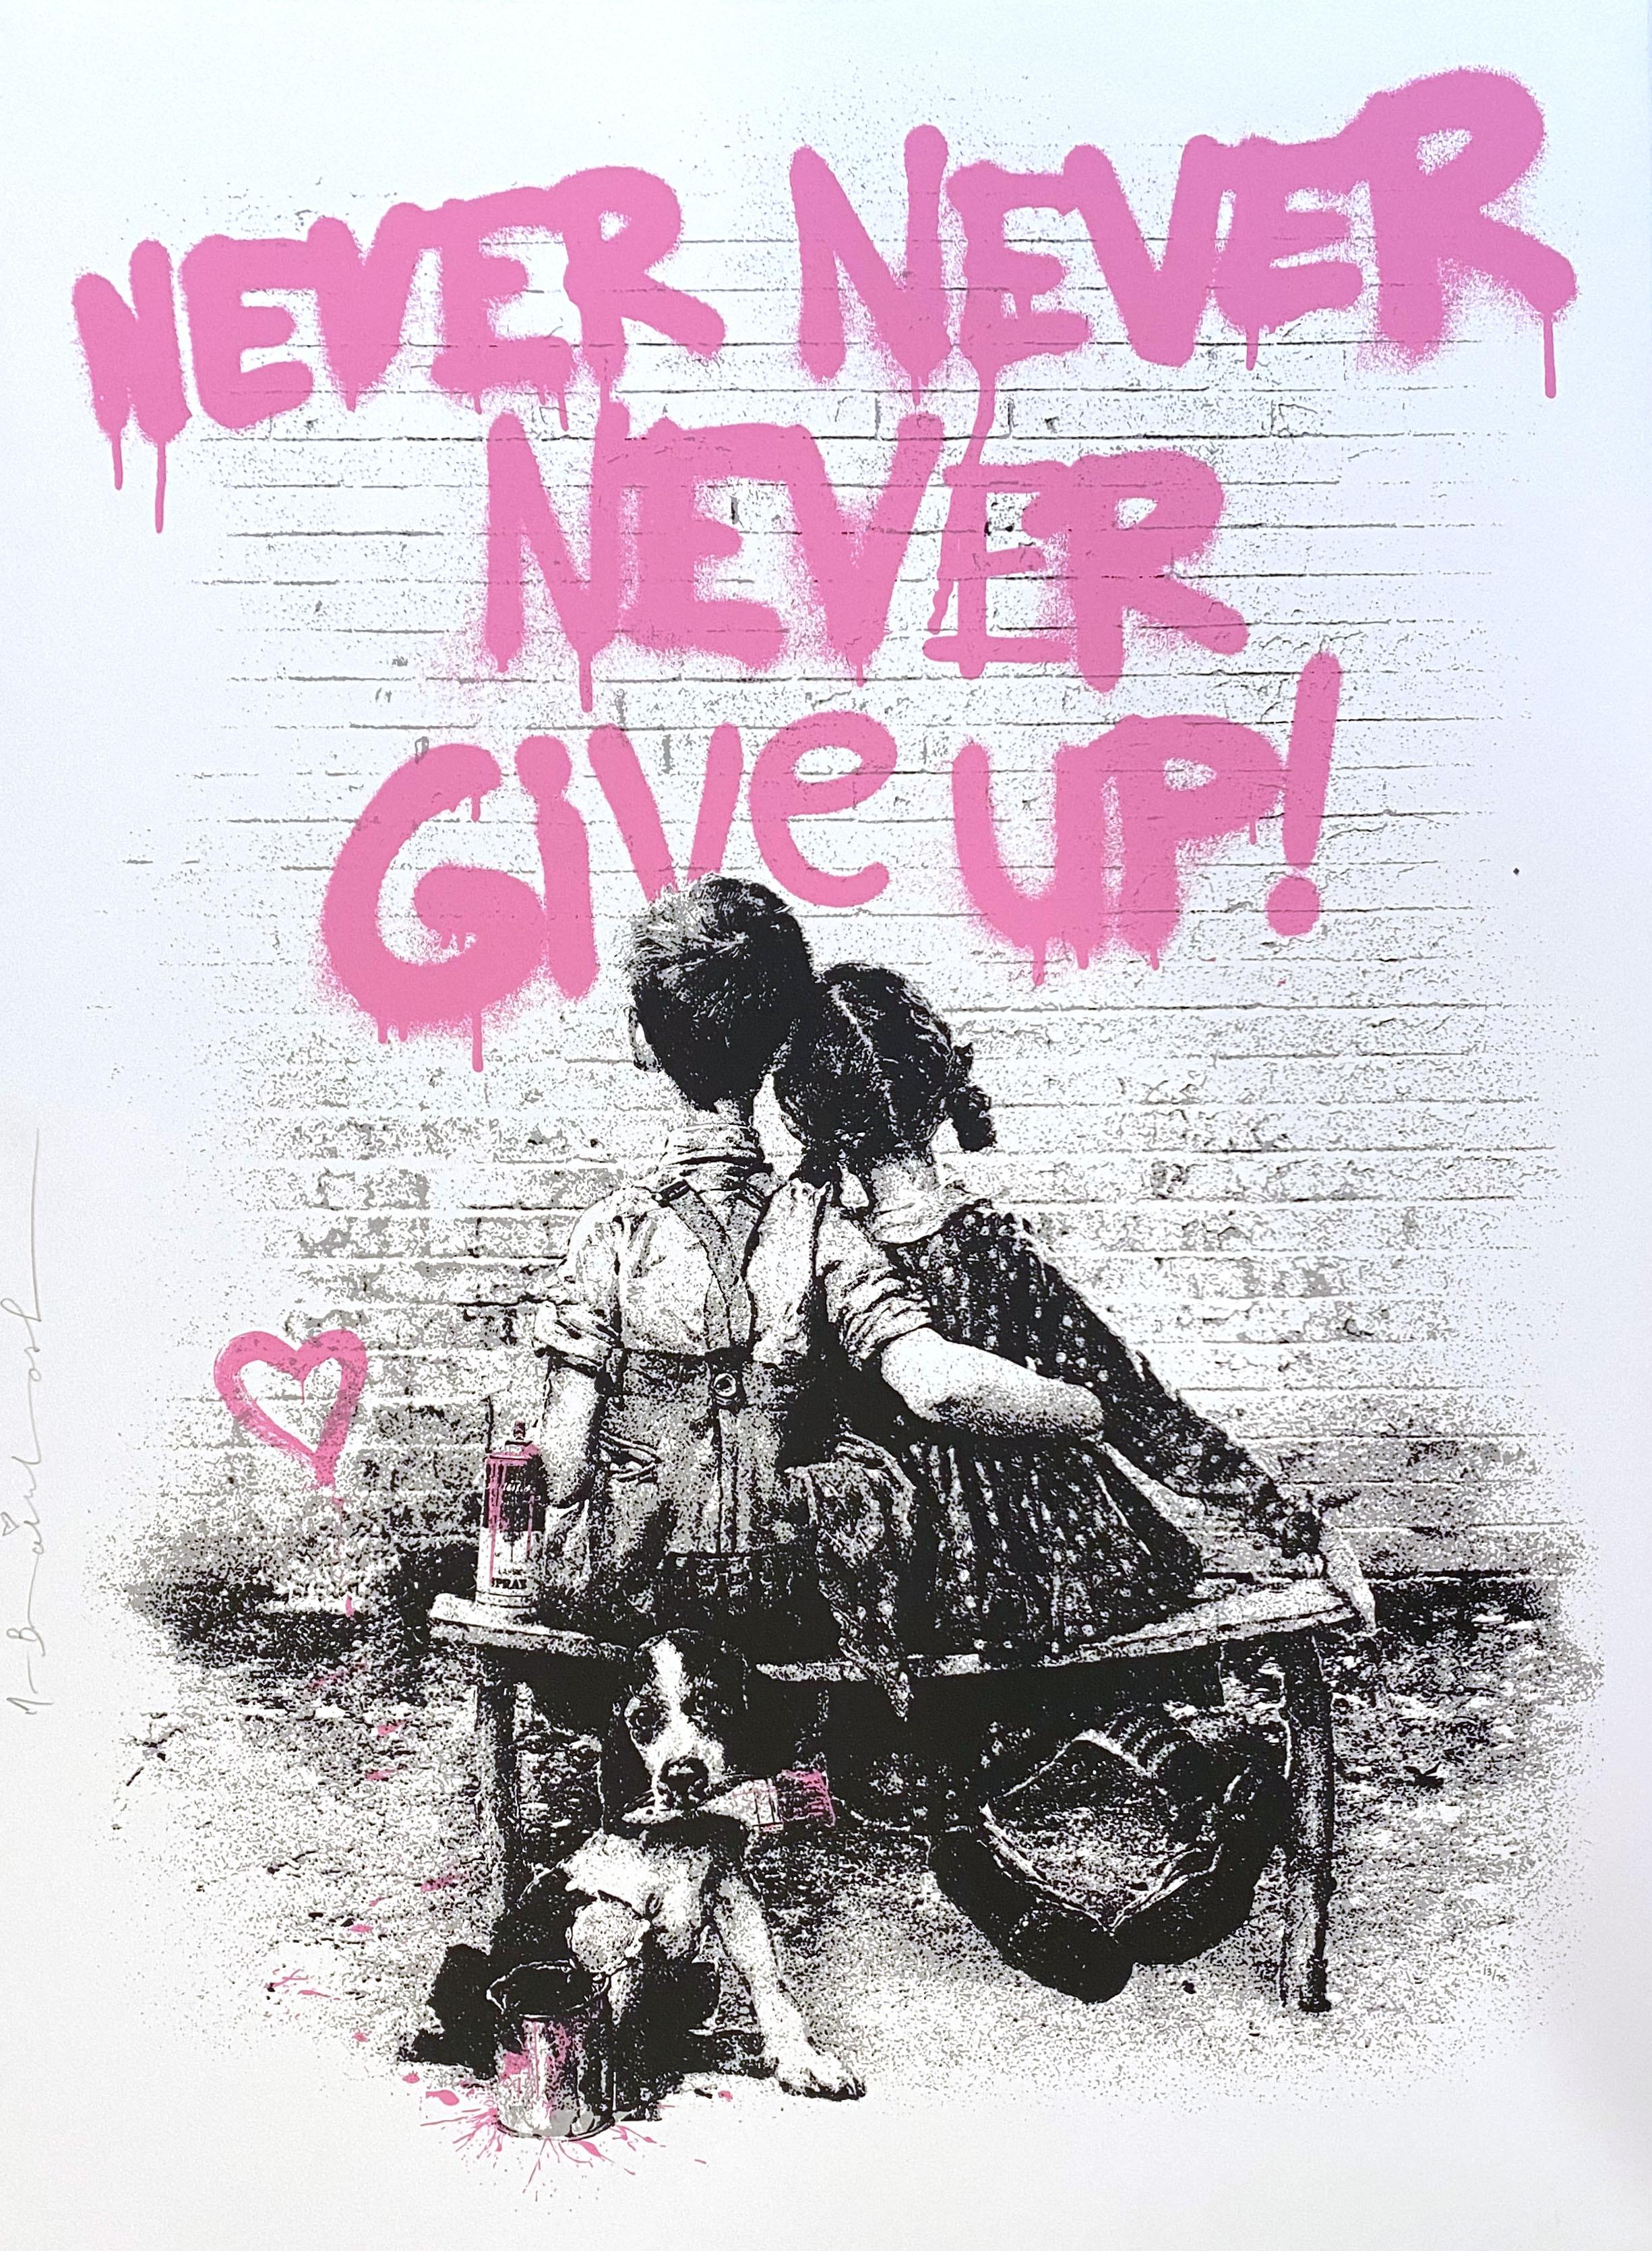 Don't Give Up! (Pink) - Print by Mr. Brainwash